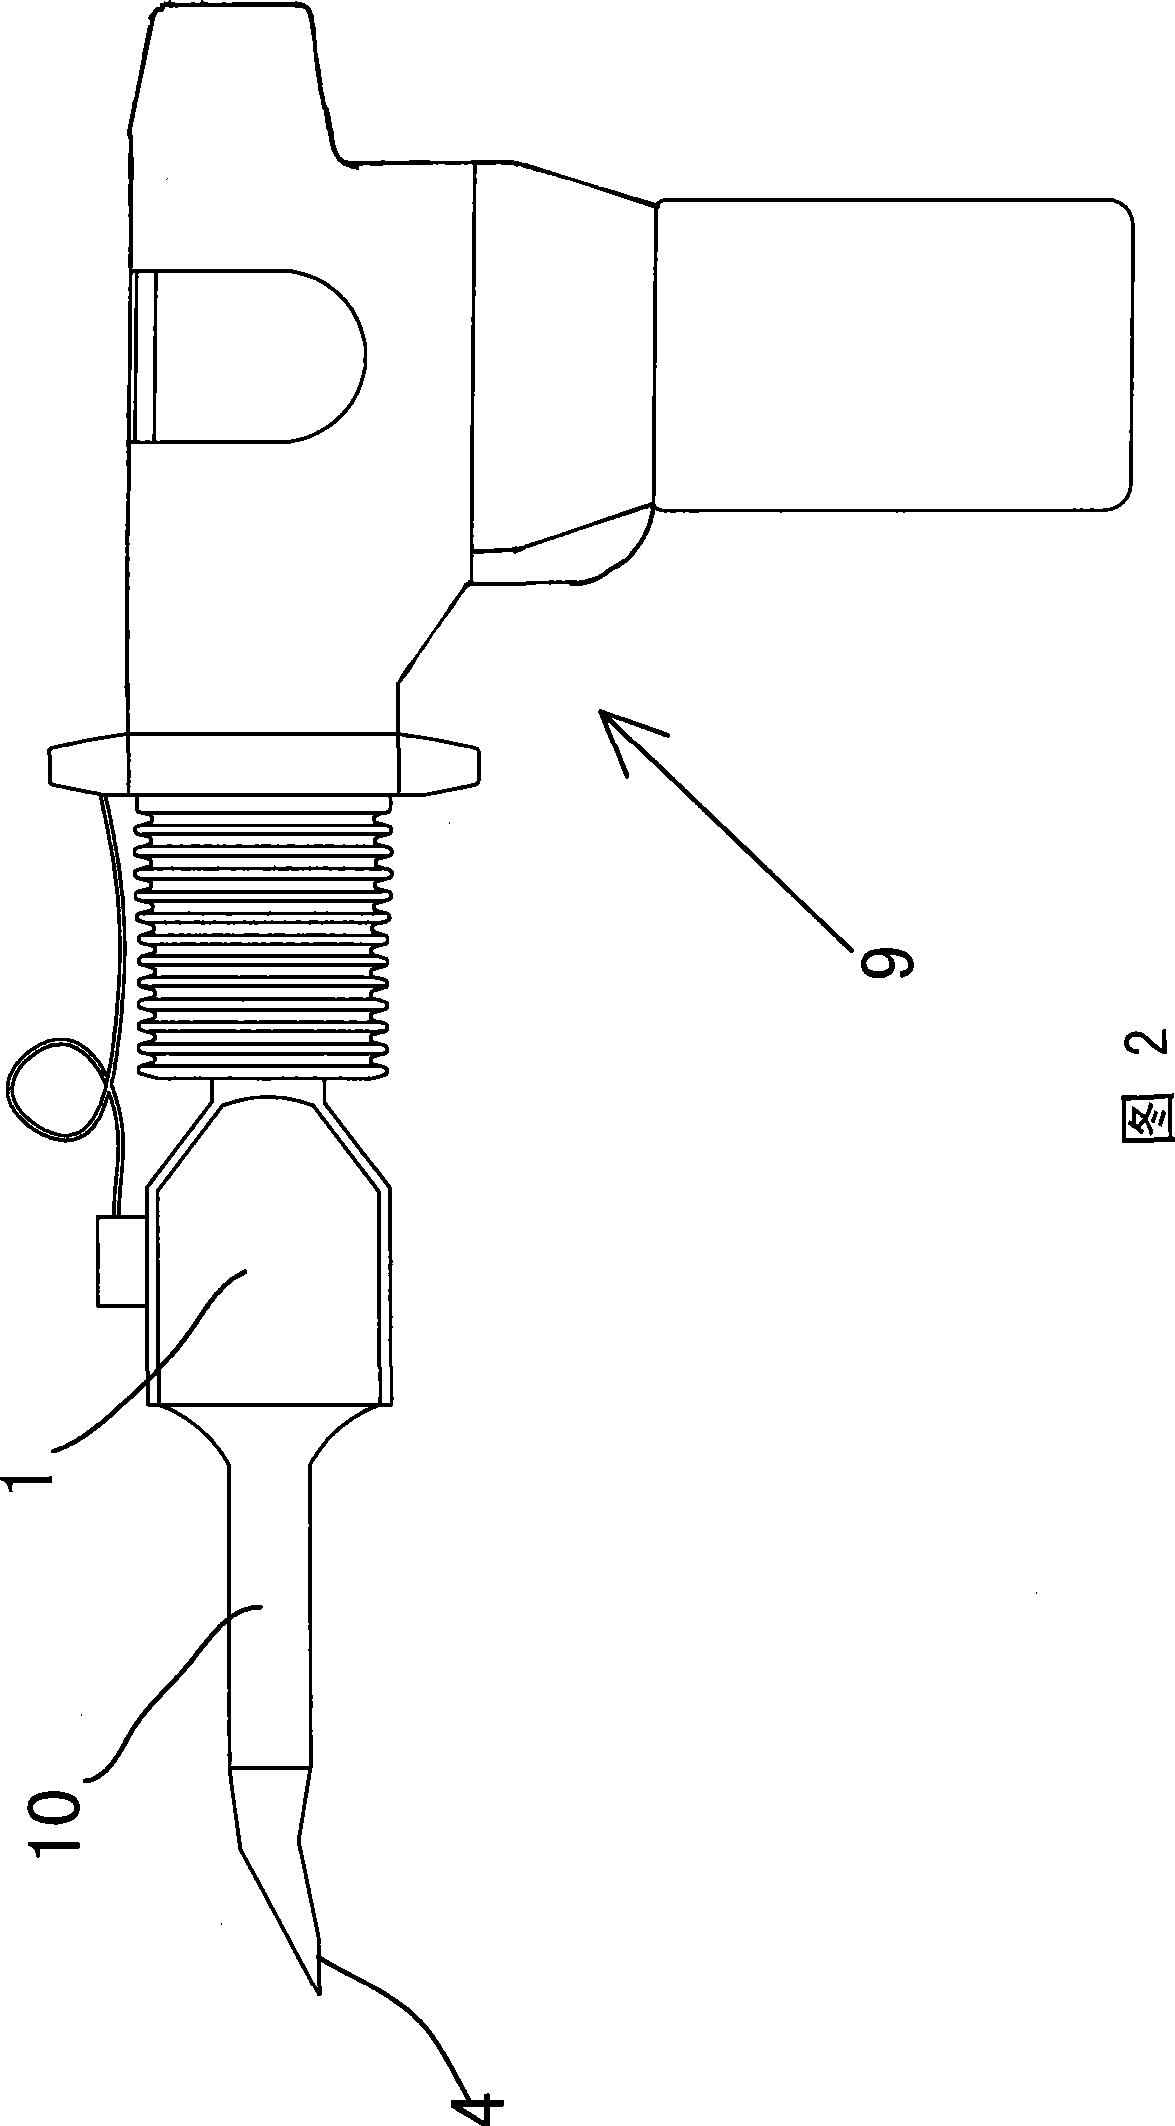 Grinding method combining mechanical reciprocation and supersonic vibration